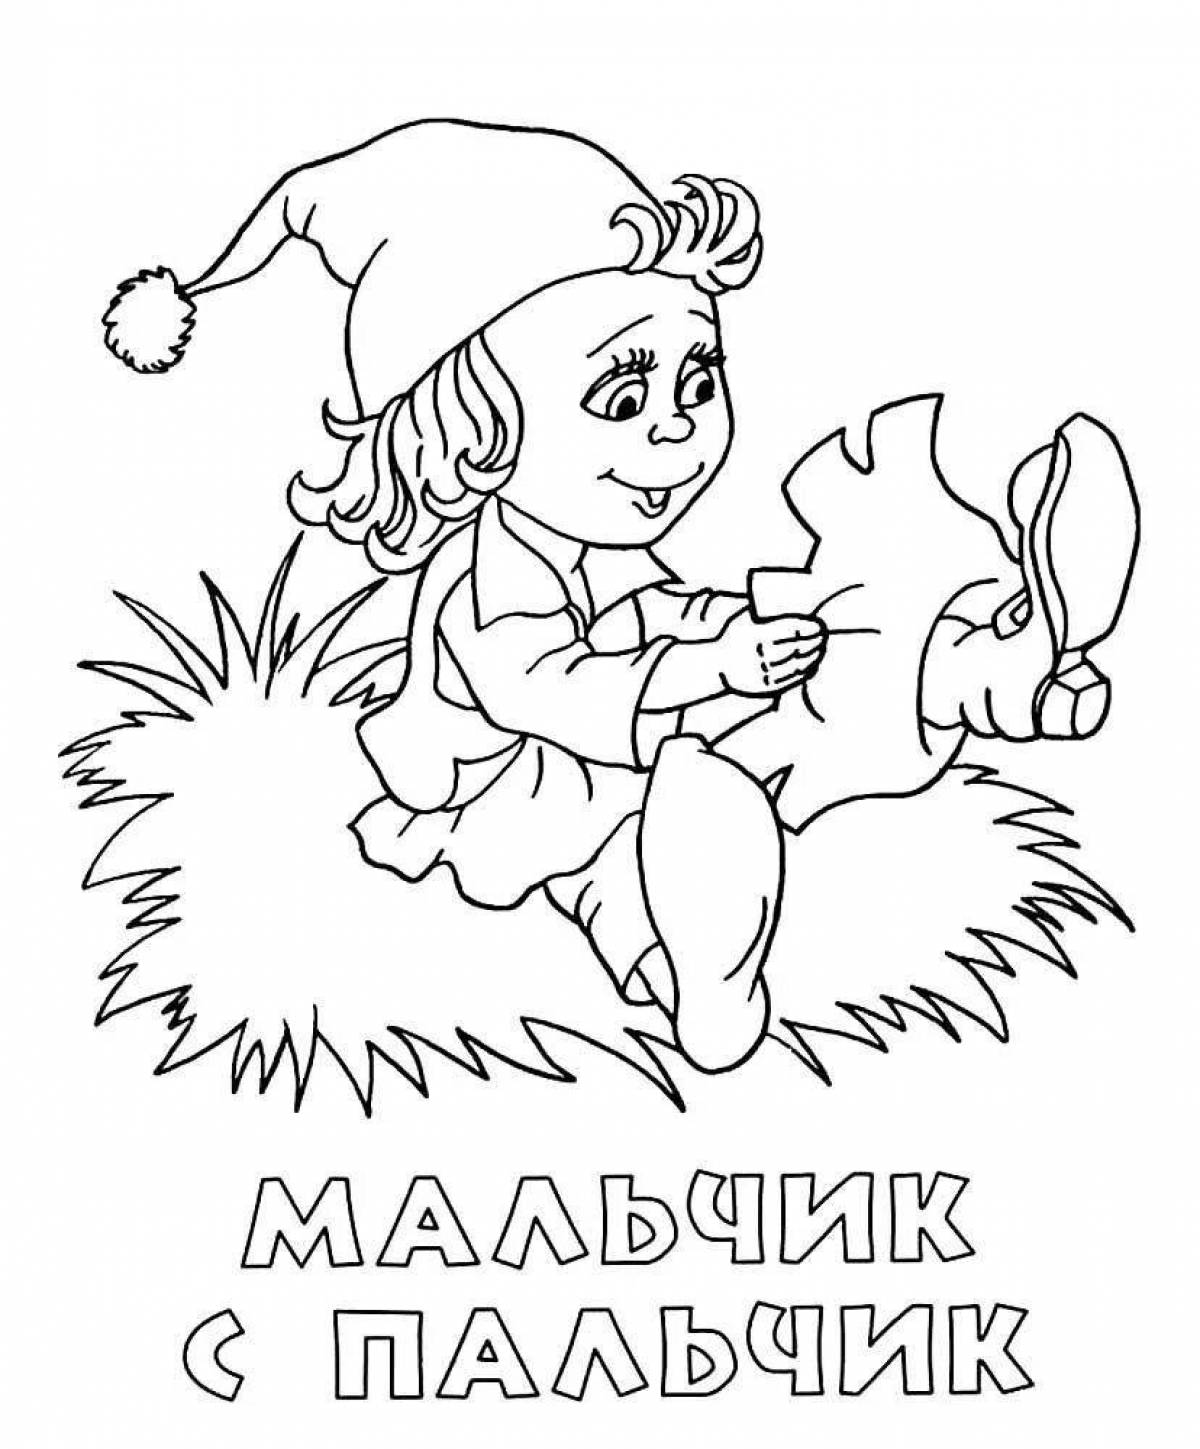 Surreal coloring pages fairytale covers